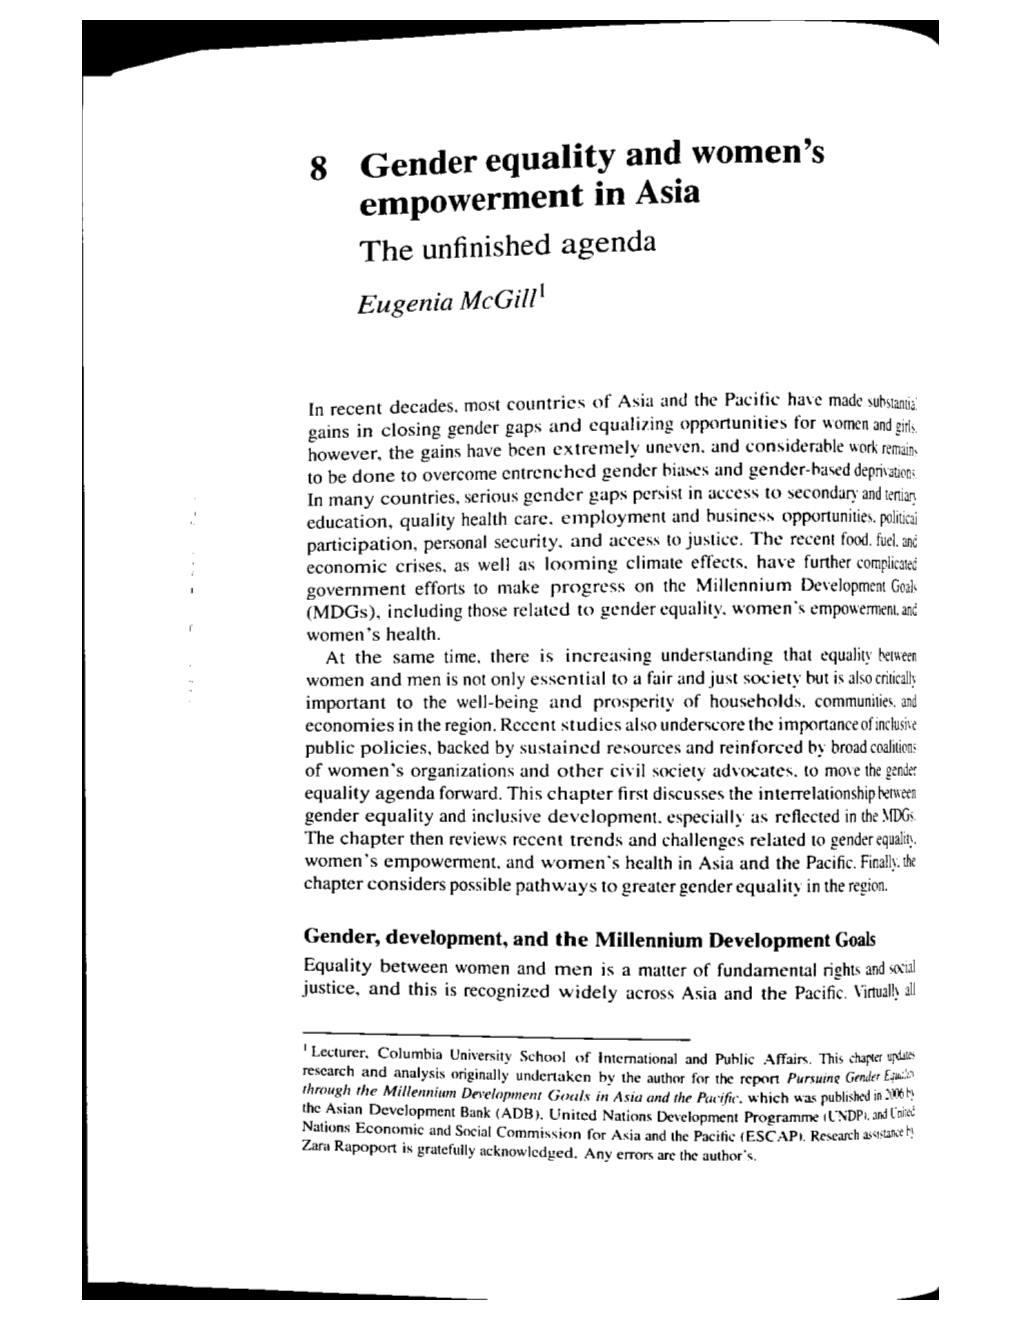 Gender Equality and Women's Empowerment in Asia the Unfinished Agenda